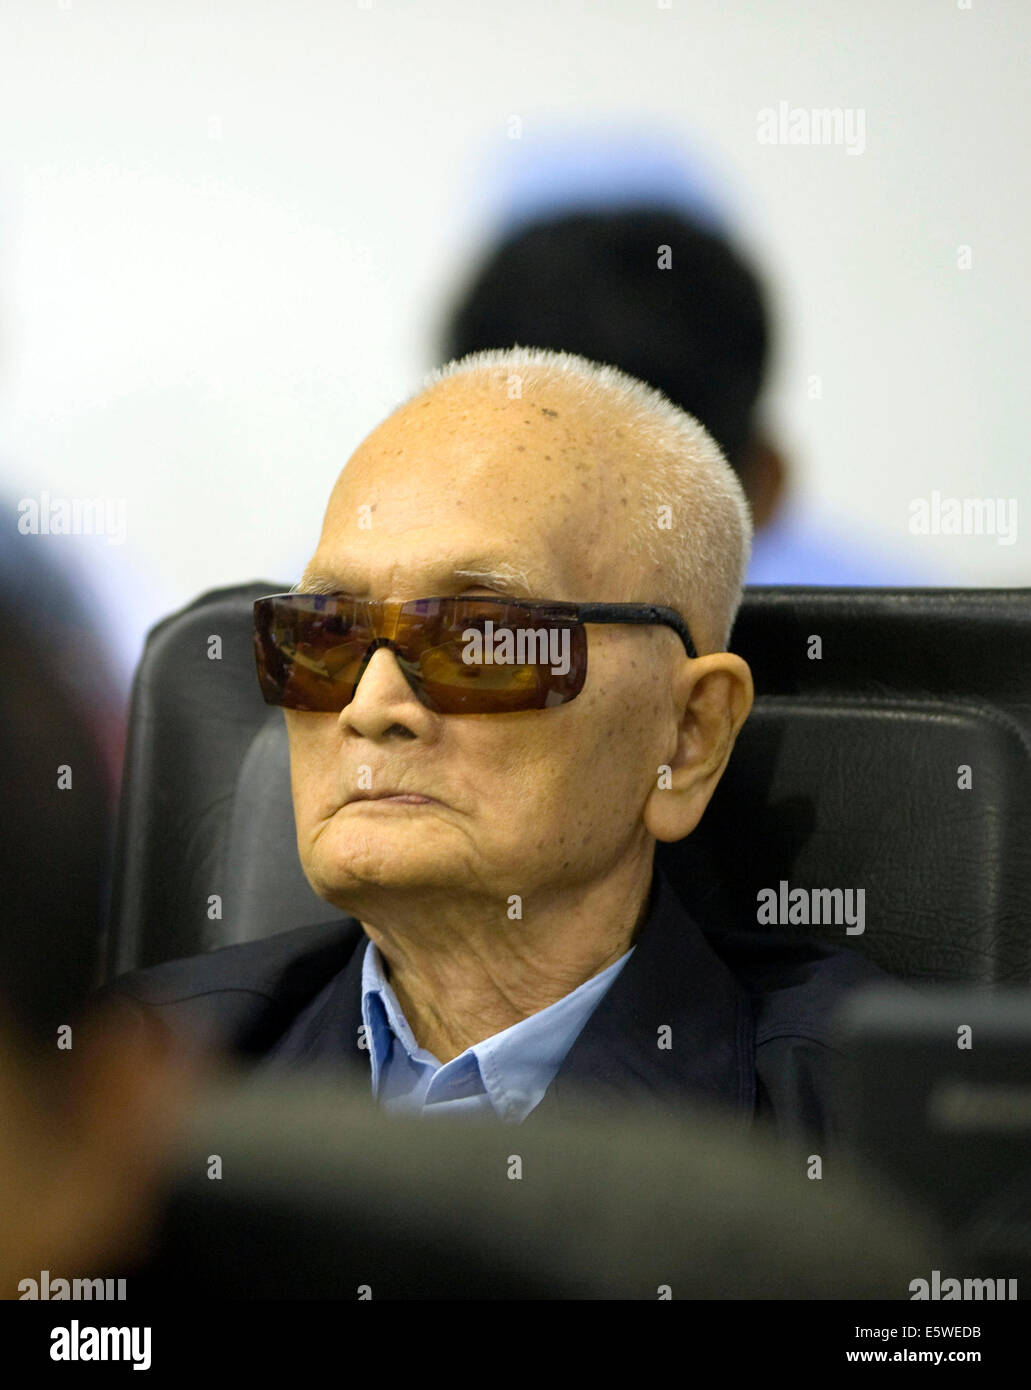 Phnom Penh, Cambodia. 7th Aug, 2014. Nuon Chea, 88, the chief ideologue of the Communist Party of Kampuchea, appears in the courtroom in Phnom Penh, Cambodia, Aug. 7, 2014. The United Nations war crimes tribunal convicted two aging former top leaders of the Democratic Kampuchea, also known as Khmer Rouge, of atrocity crimes against humanity and sentenced them to life in prison, according to a verdict pronounced by the tribunal's president Nil Nonn on Thursday. Credit:  ECCC/Xinhua/Alamy Live News Stock Photo